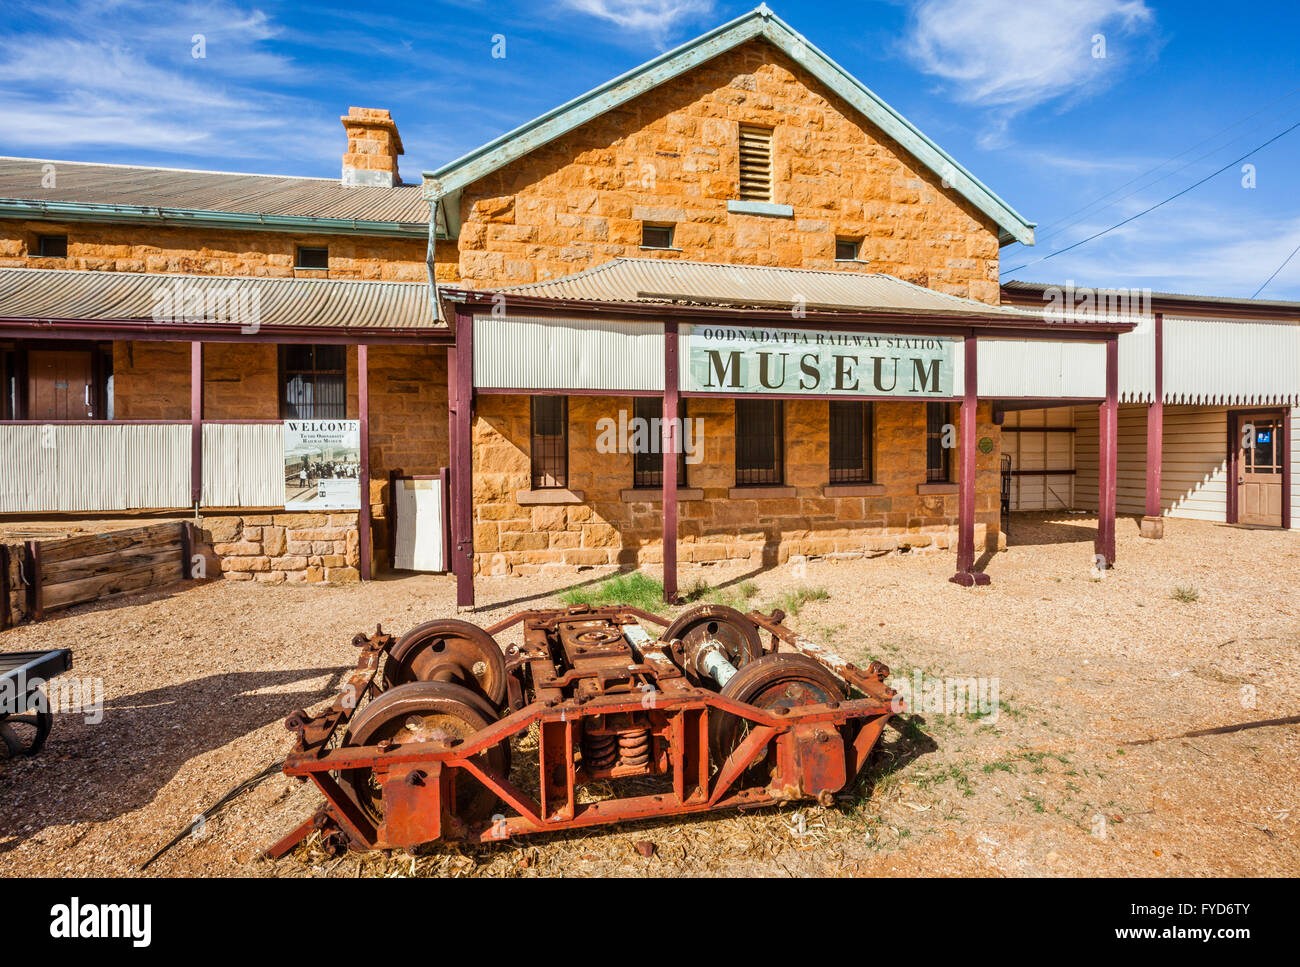 Oodnadatta Railway Station Museum, South Australia. The station was the terminus of the Great Northern Railway in 1890 until the Stock Photo